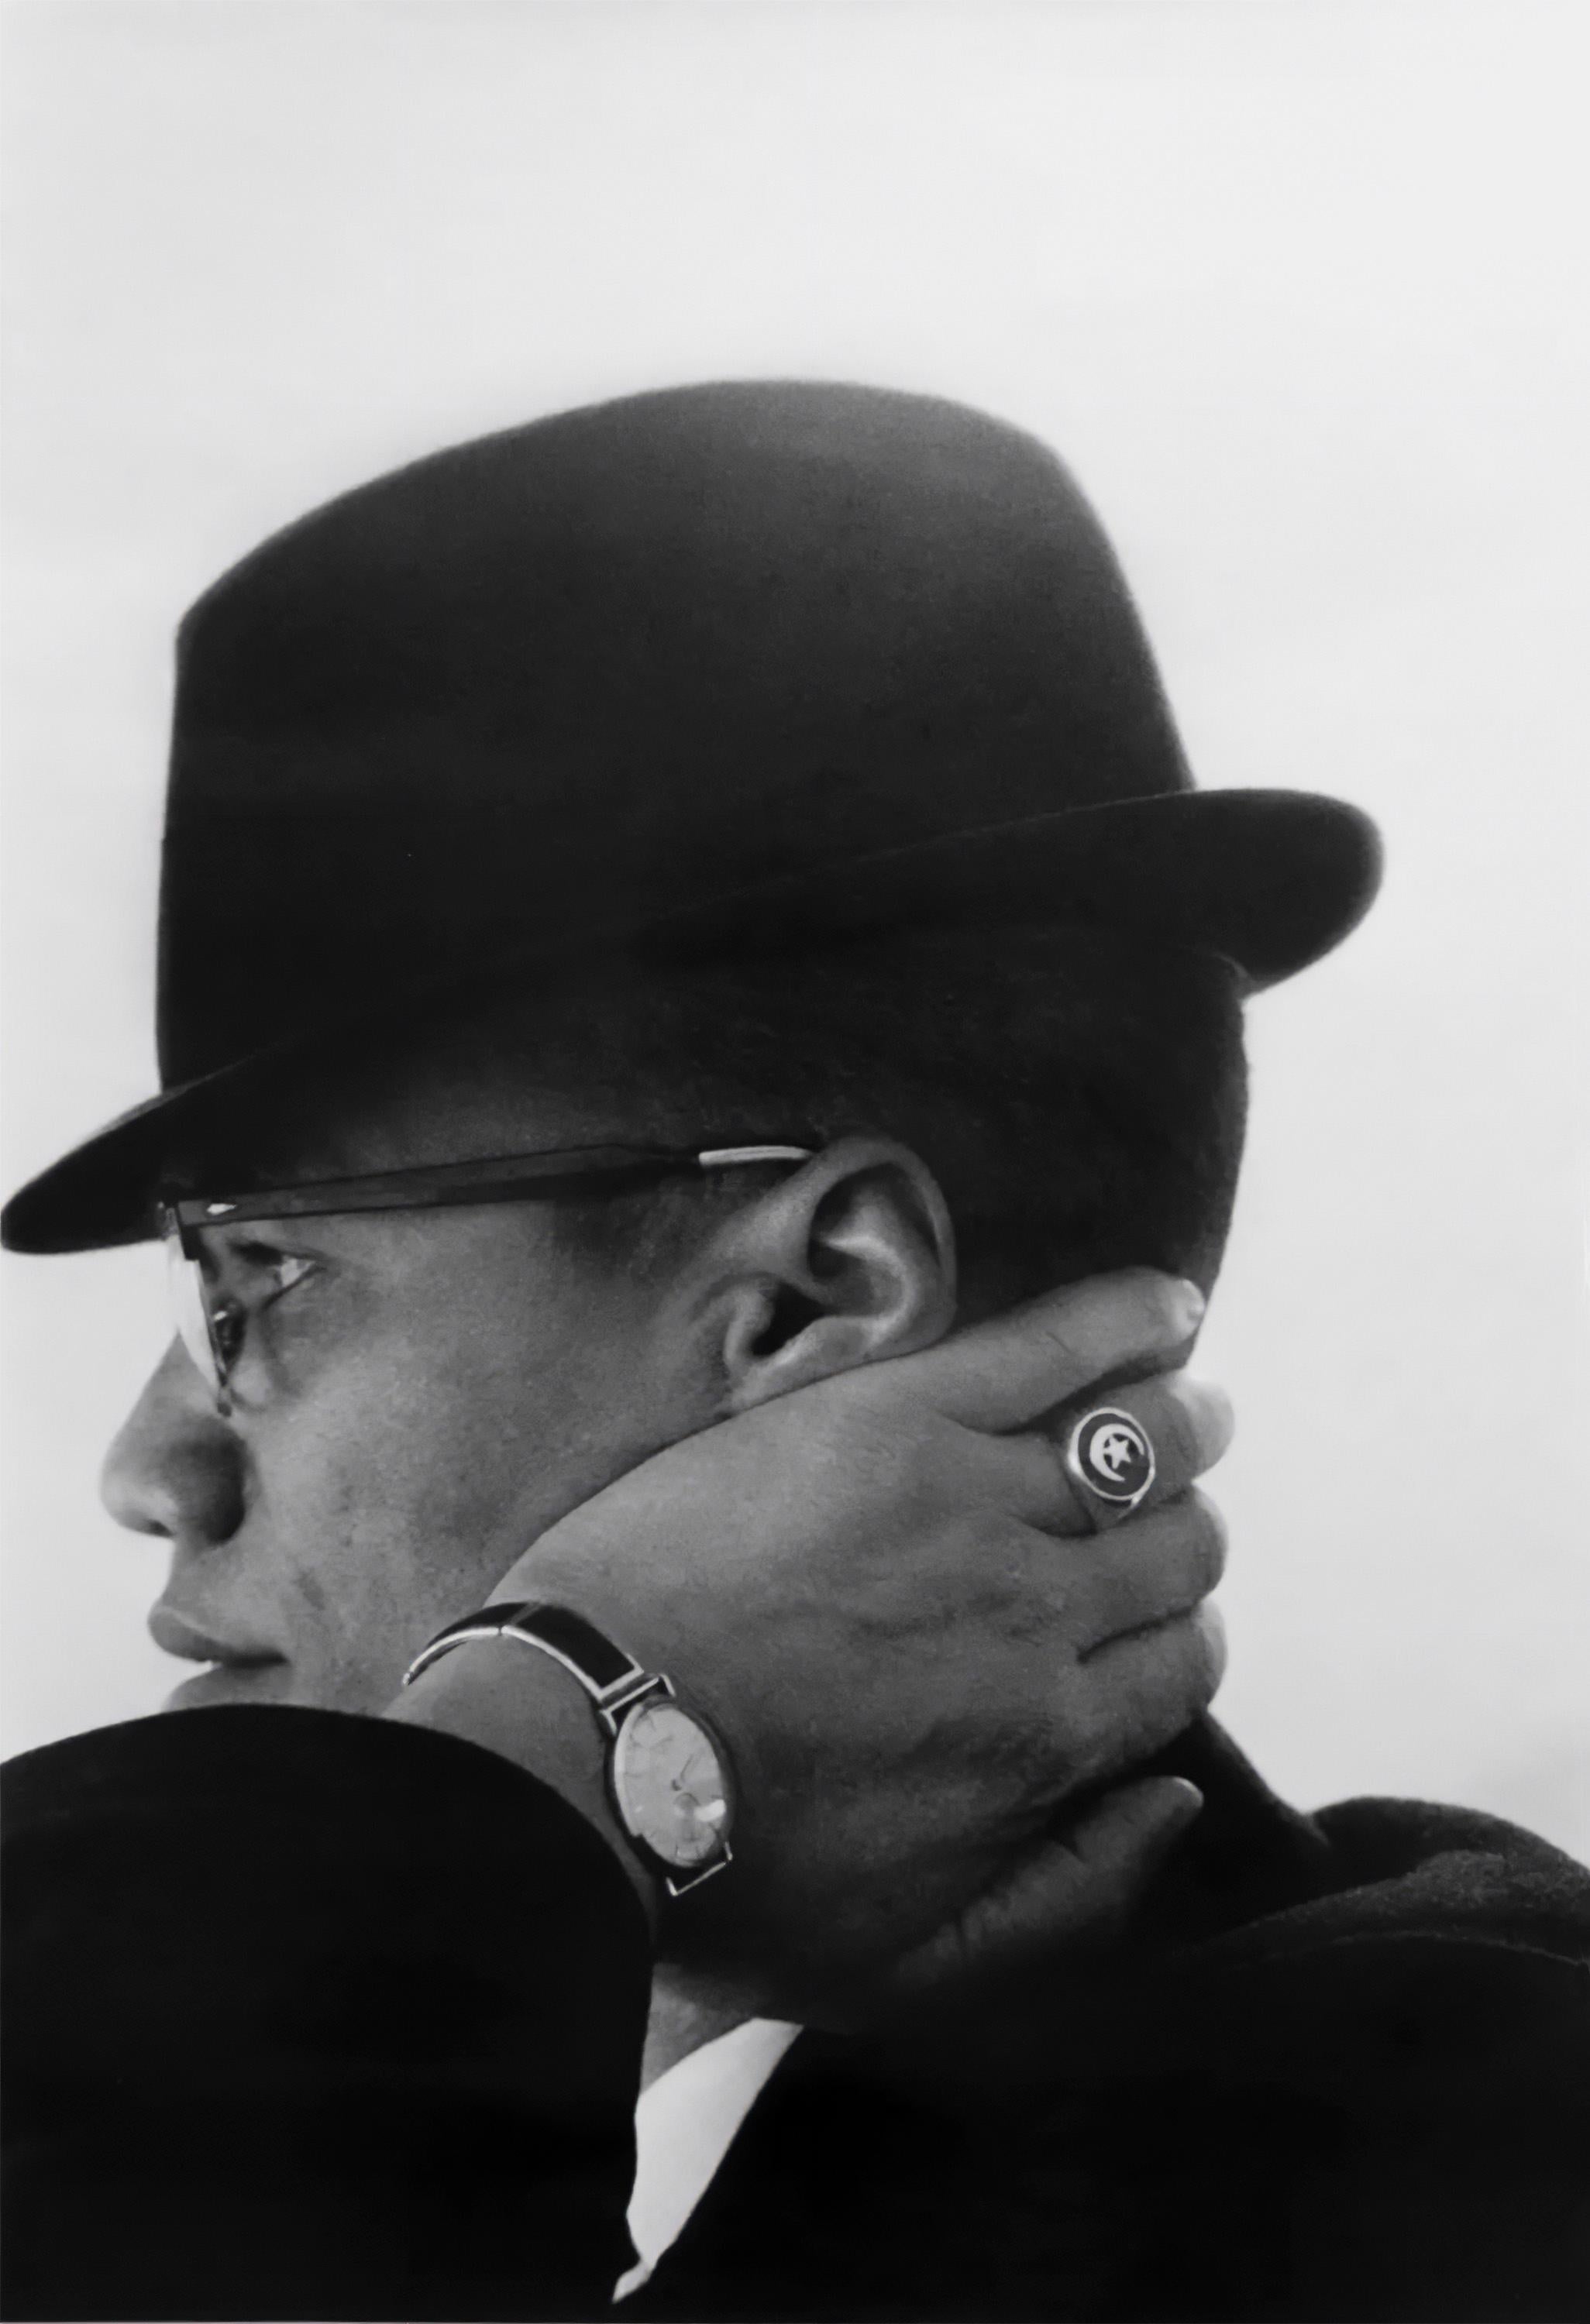 American Muslim minister and human rights activist Malcolm X in Chicago, Illinois in 1962.

All available sizes and editions:
24" x 20", Edition of 25 + 3 Artist Proofs
34" x 24", Edition of 25 + 3 Artist Proofs

"Eve Arnold, born in 1912 to